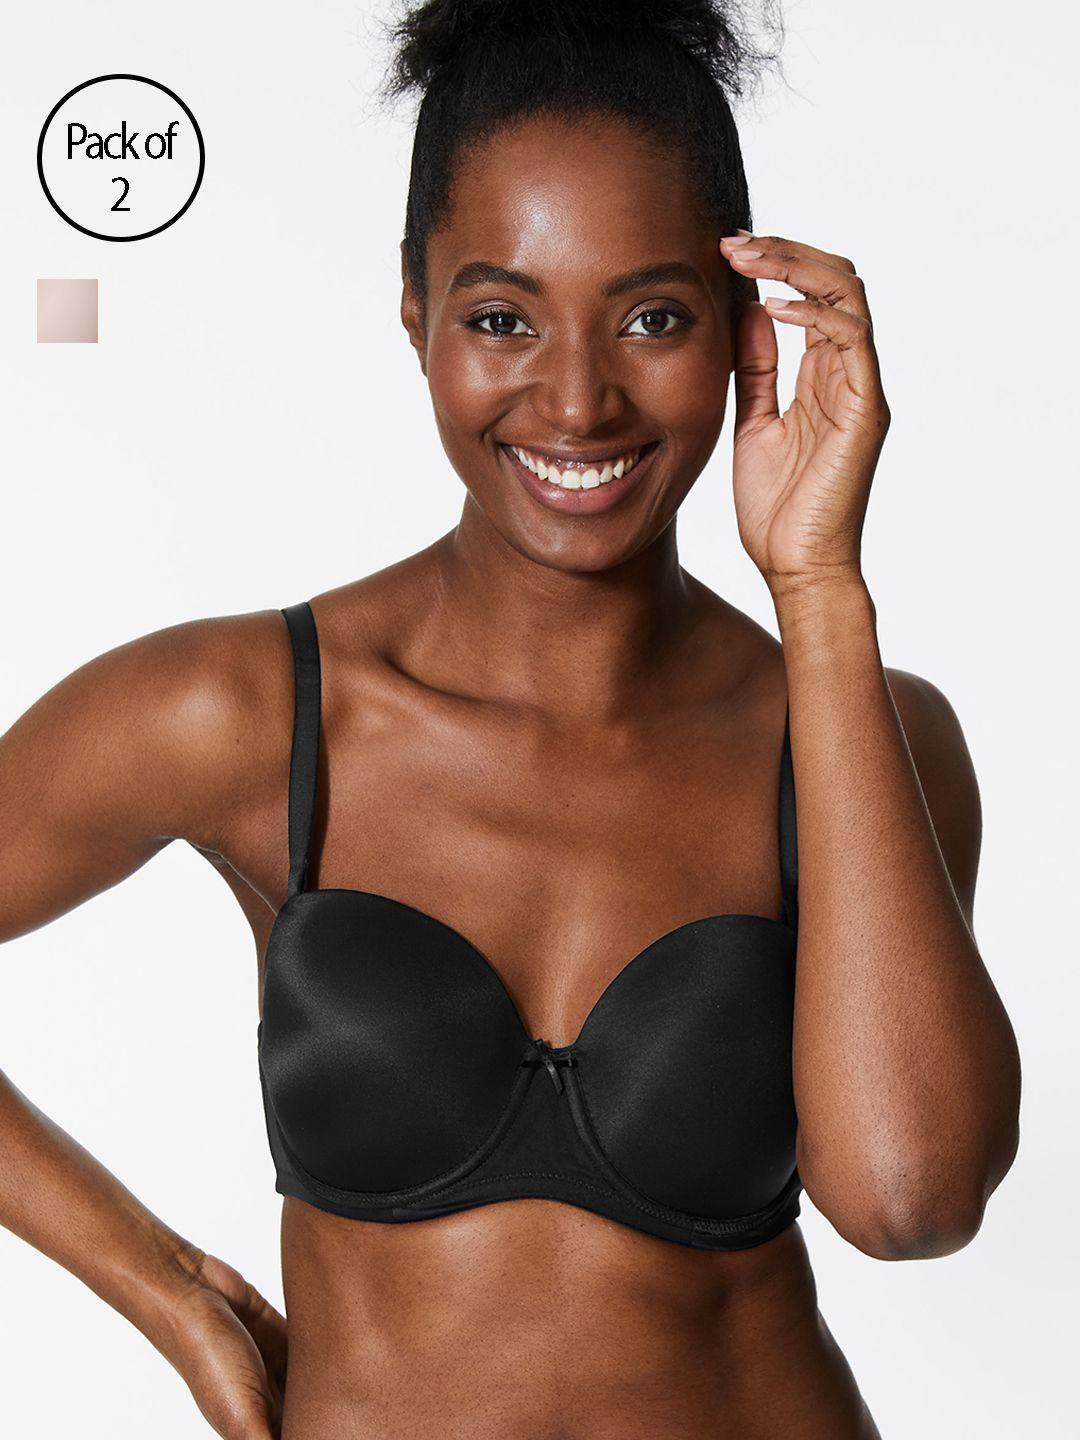 marks & spencer pack of 2 underwired non padded everyday bras t332964